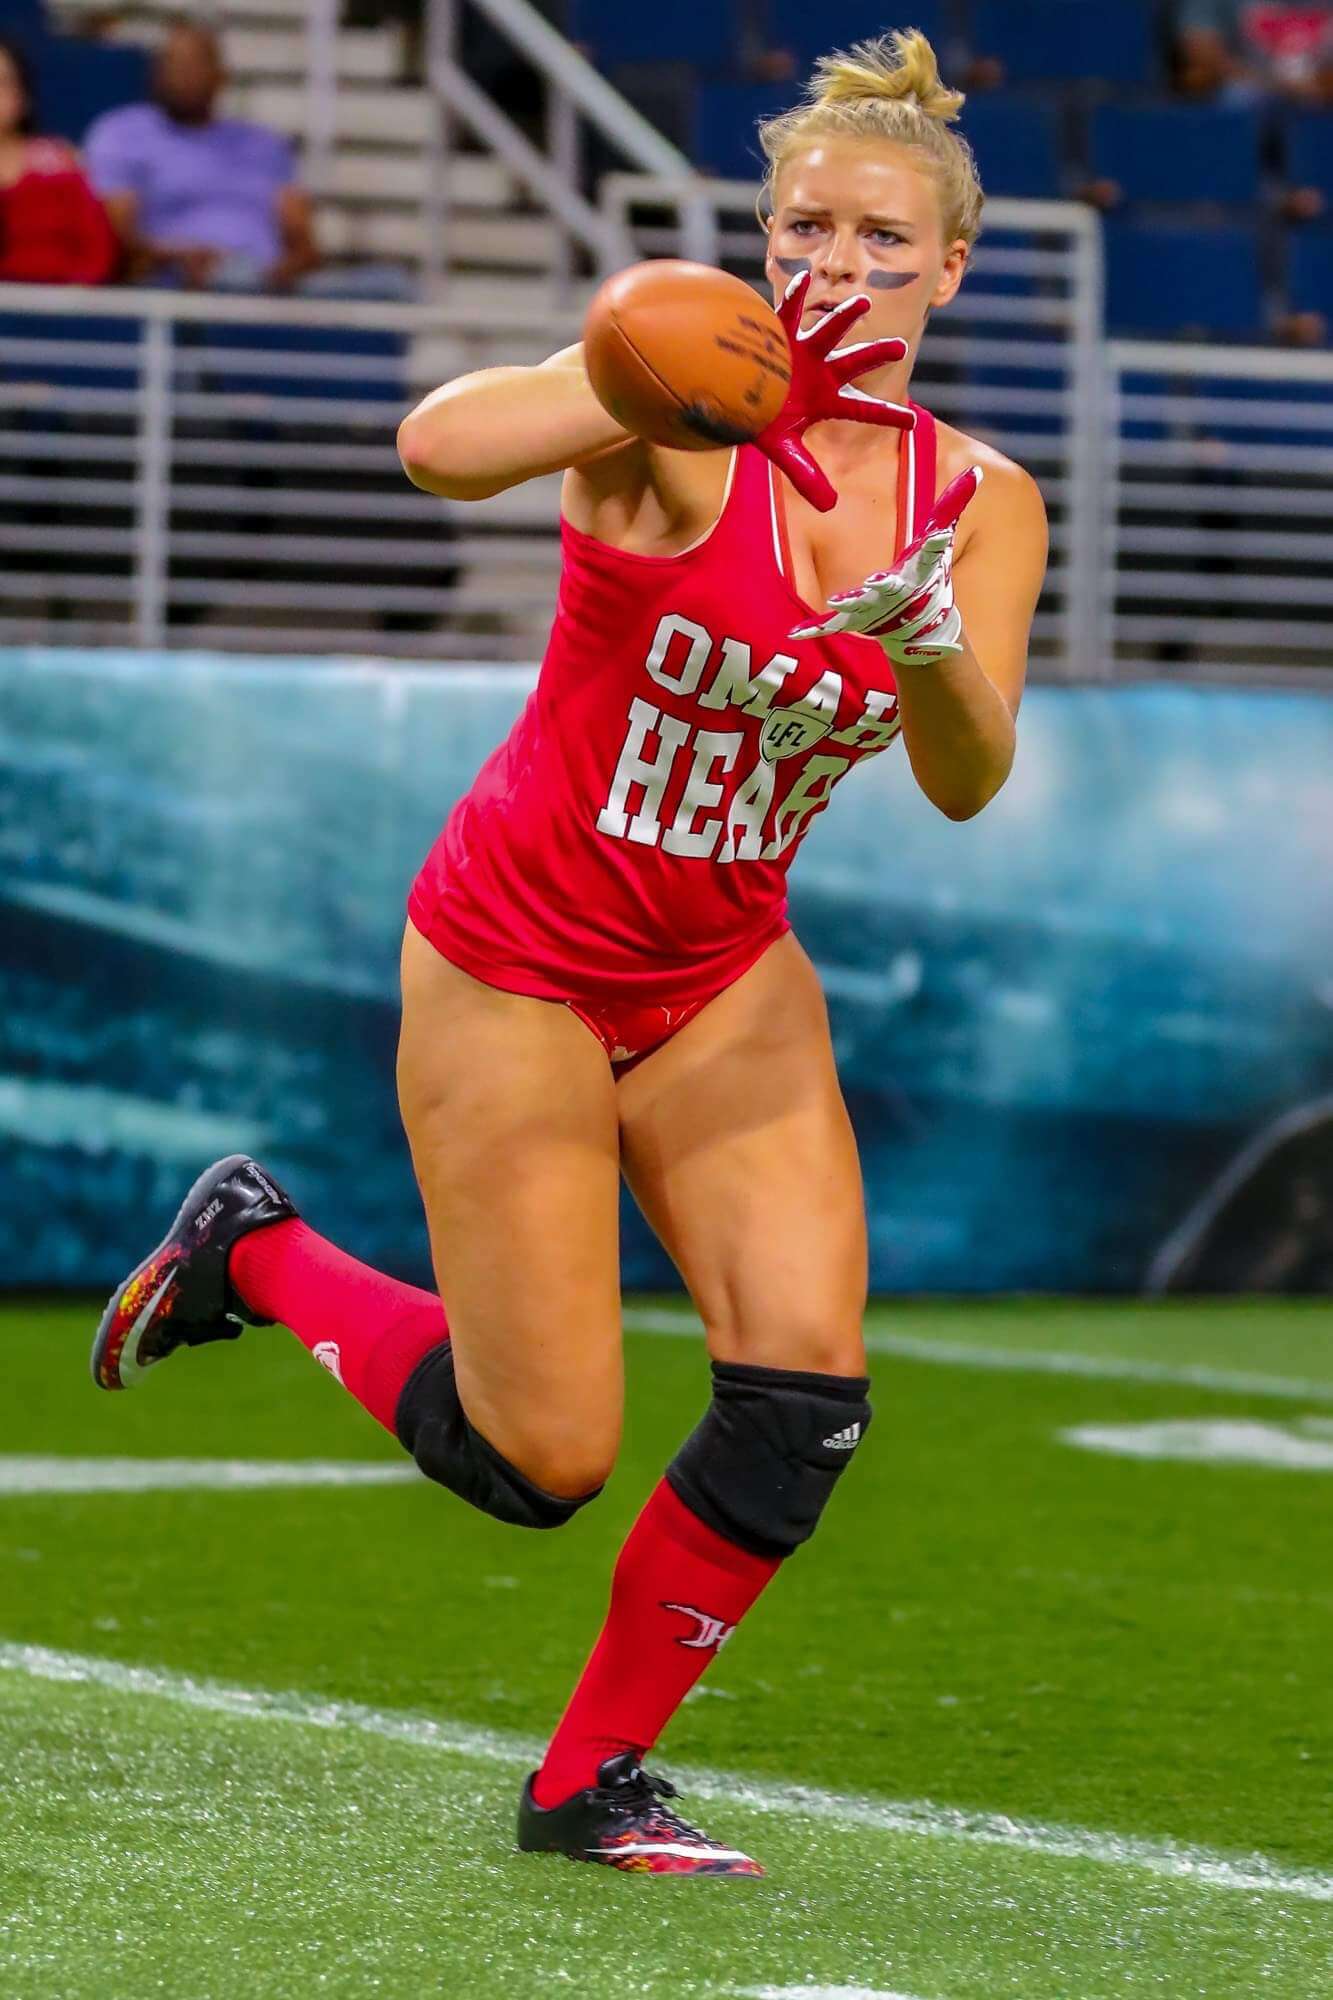 The Legends Football League Beautiful Women And Football, Need We Say Anymore! 14